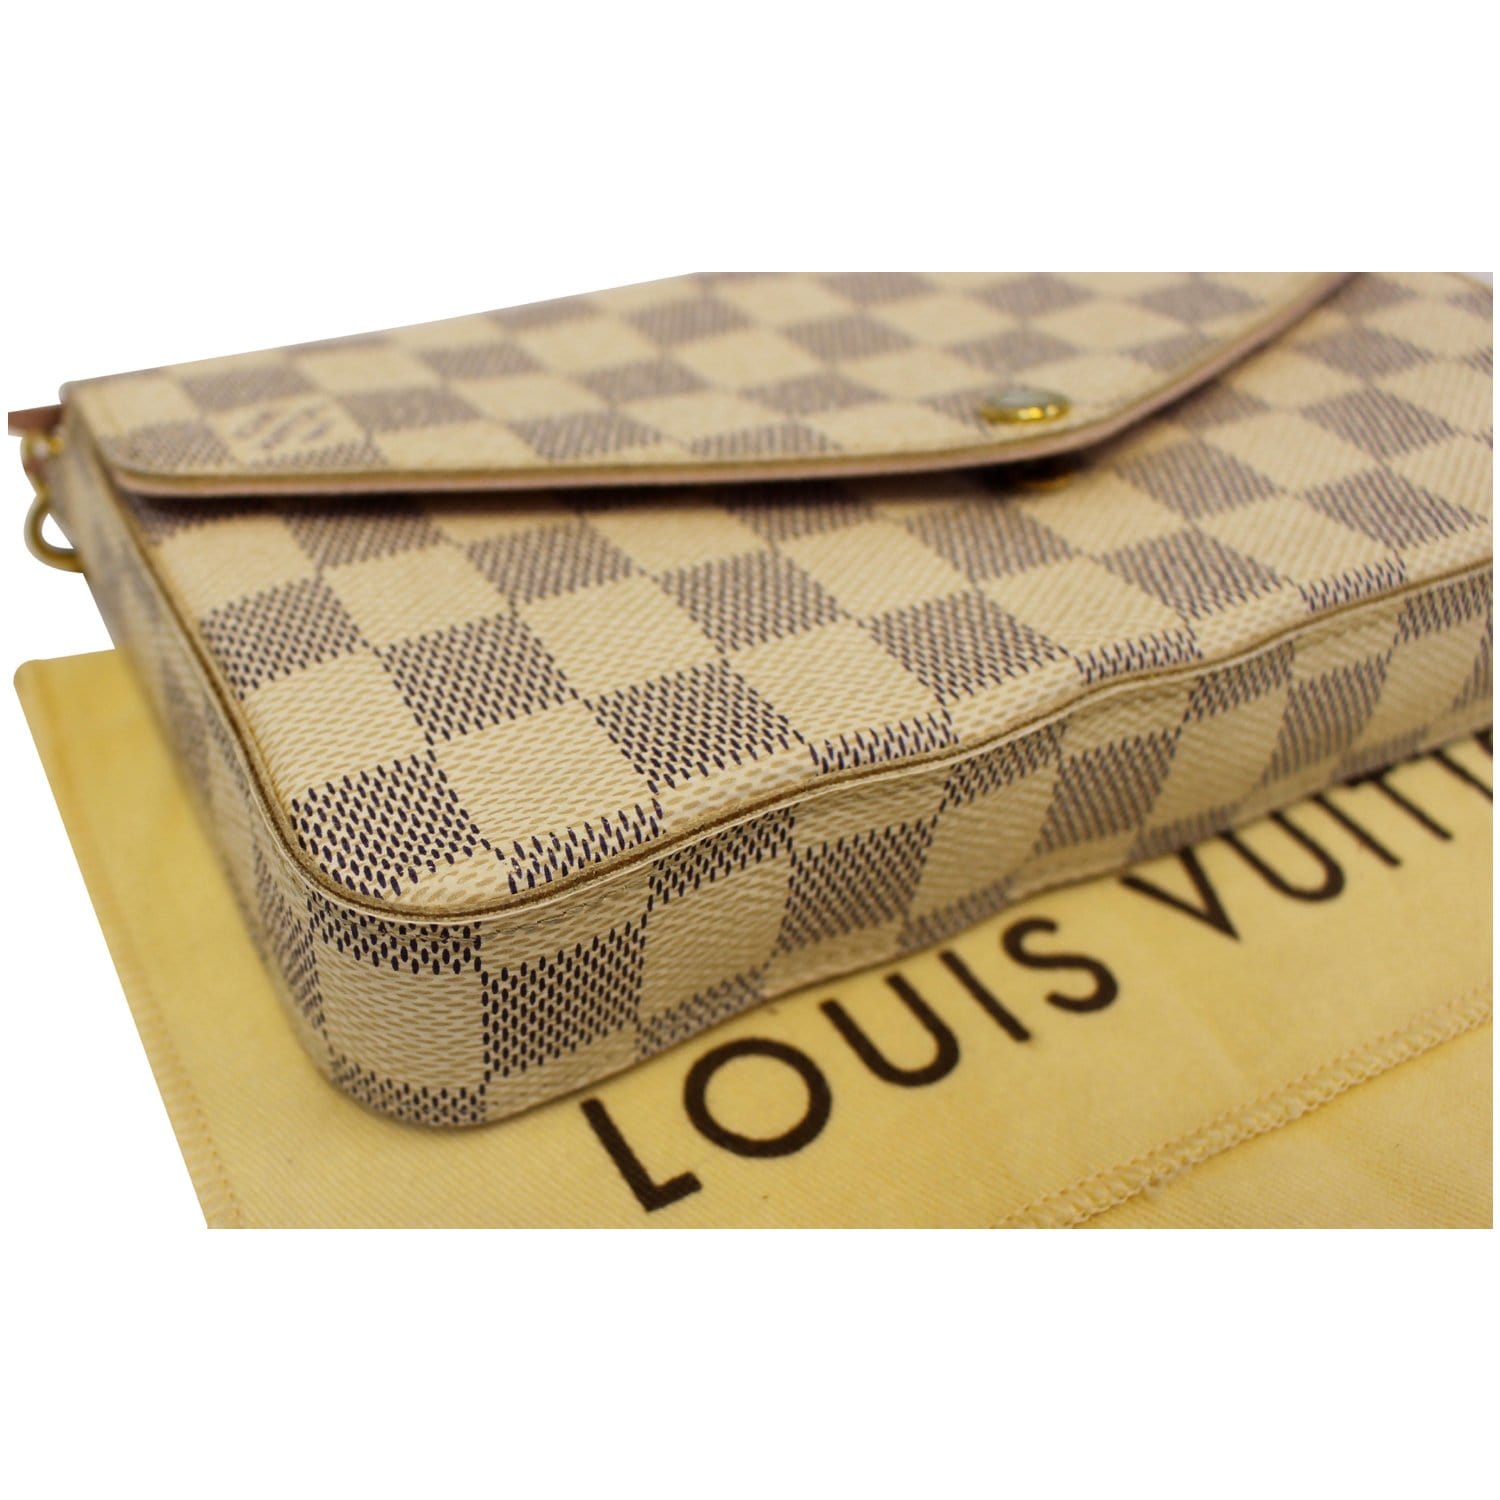 ♻️Previously Owned♻️ Louis Vuitton felicie pochette and pouch